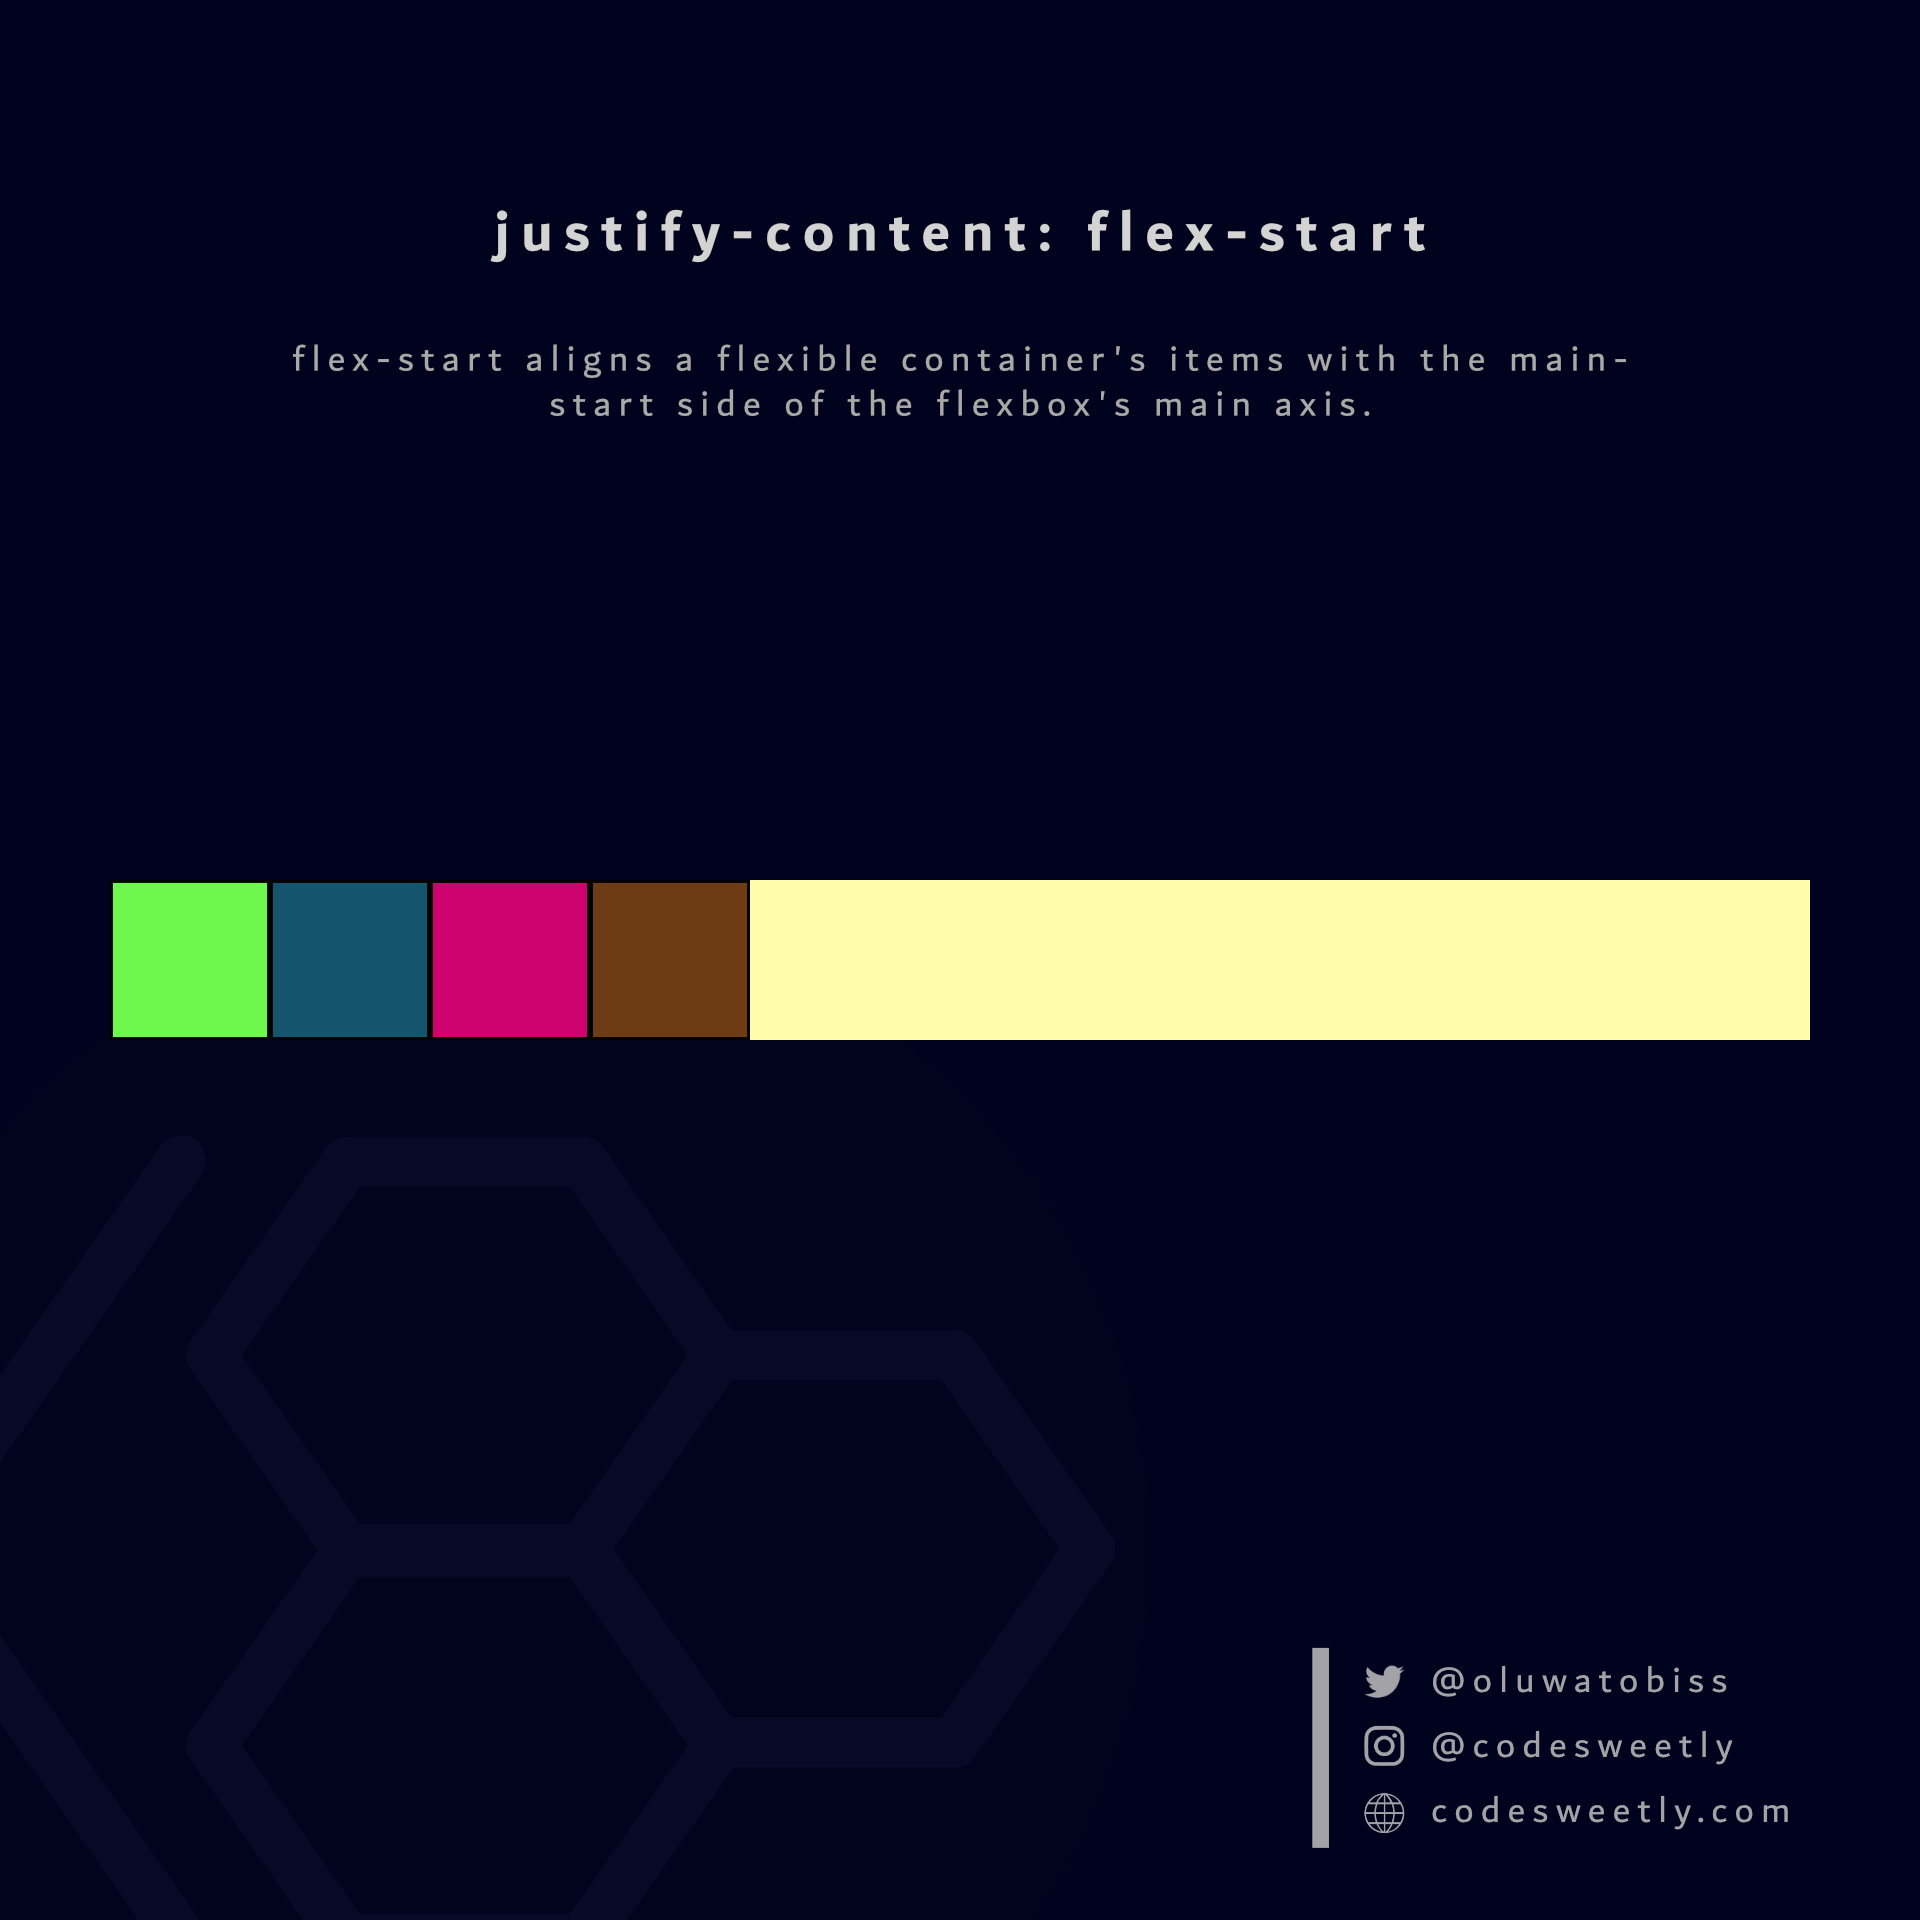 justify-content's flex-start value aligns flexible items to the flexbox's main-start edge